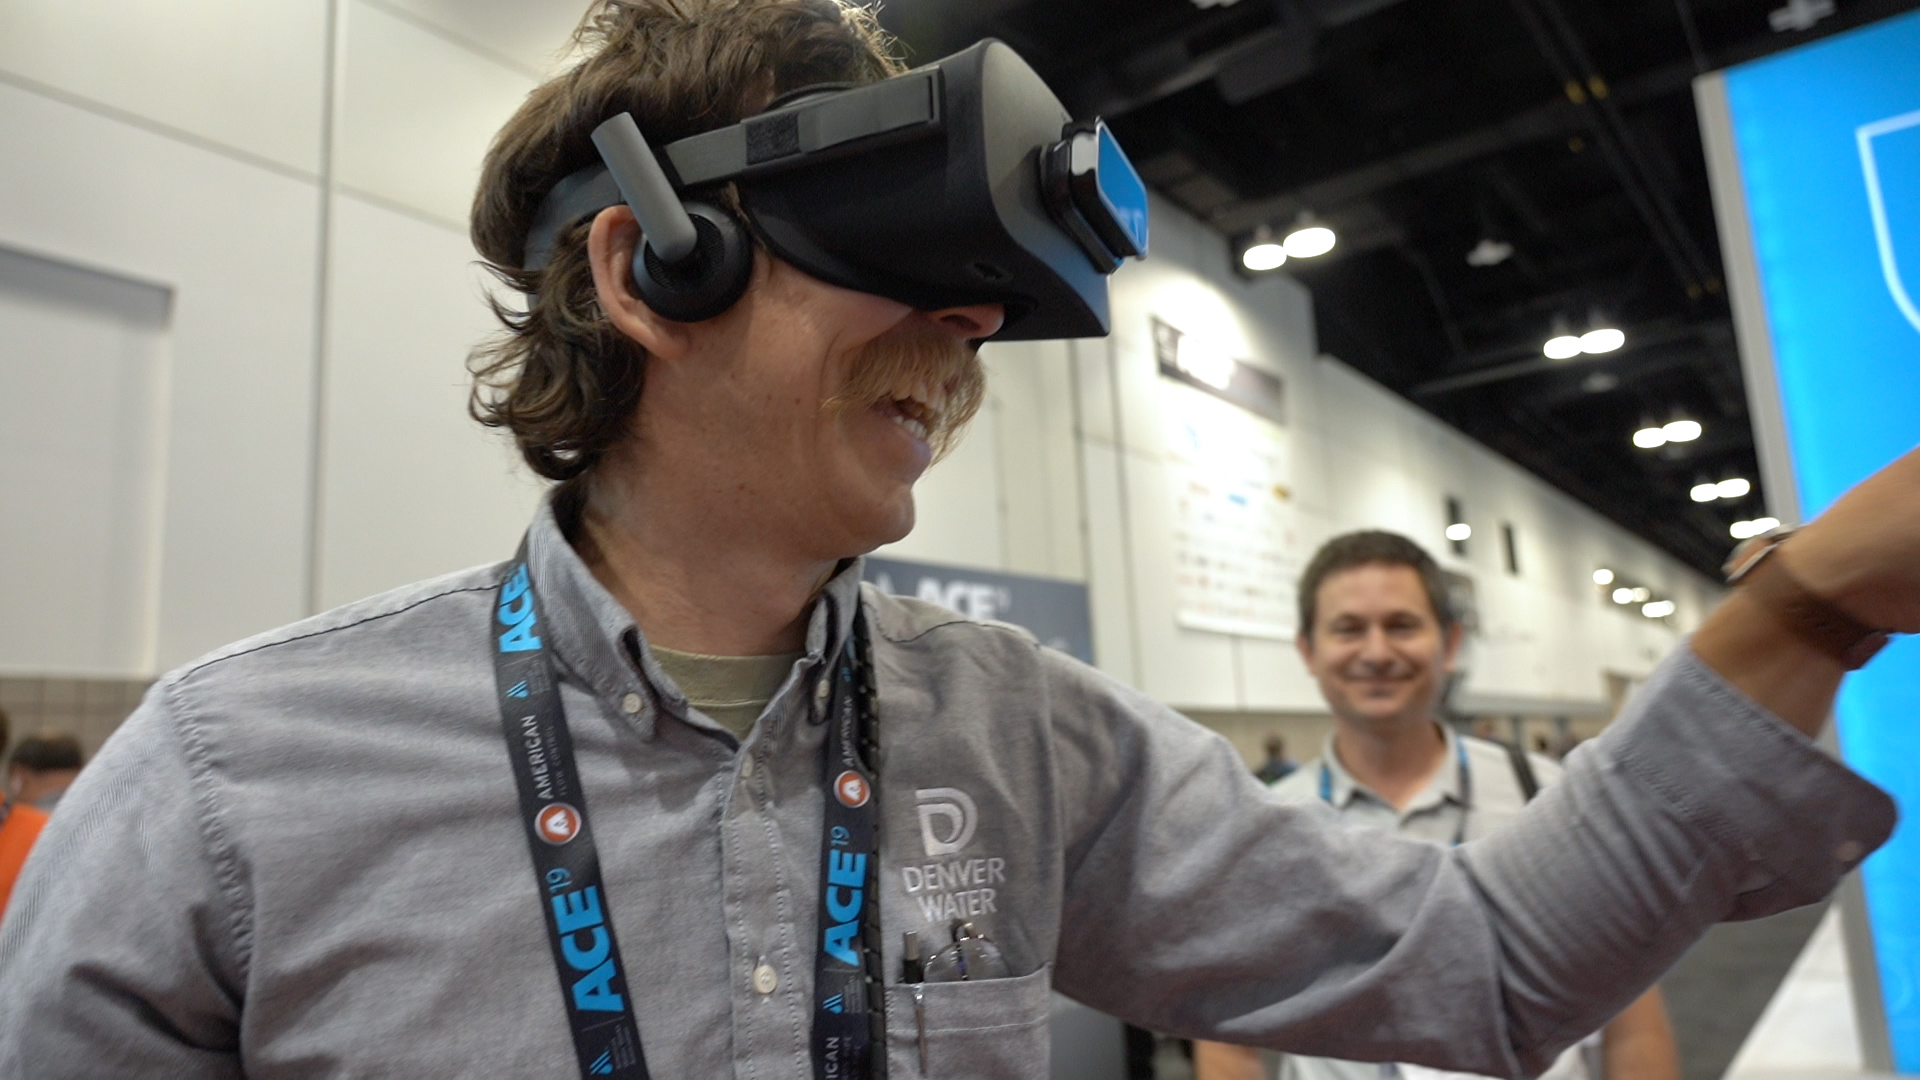 This picture shows a Denver Water employee with virtual reality goggles on playing at an interactive exhibit.